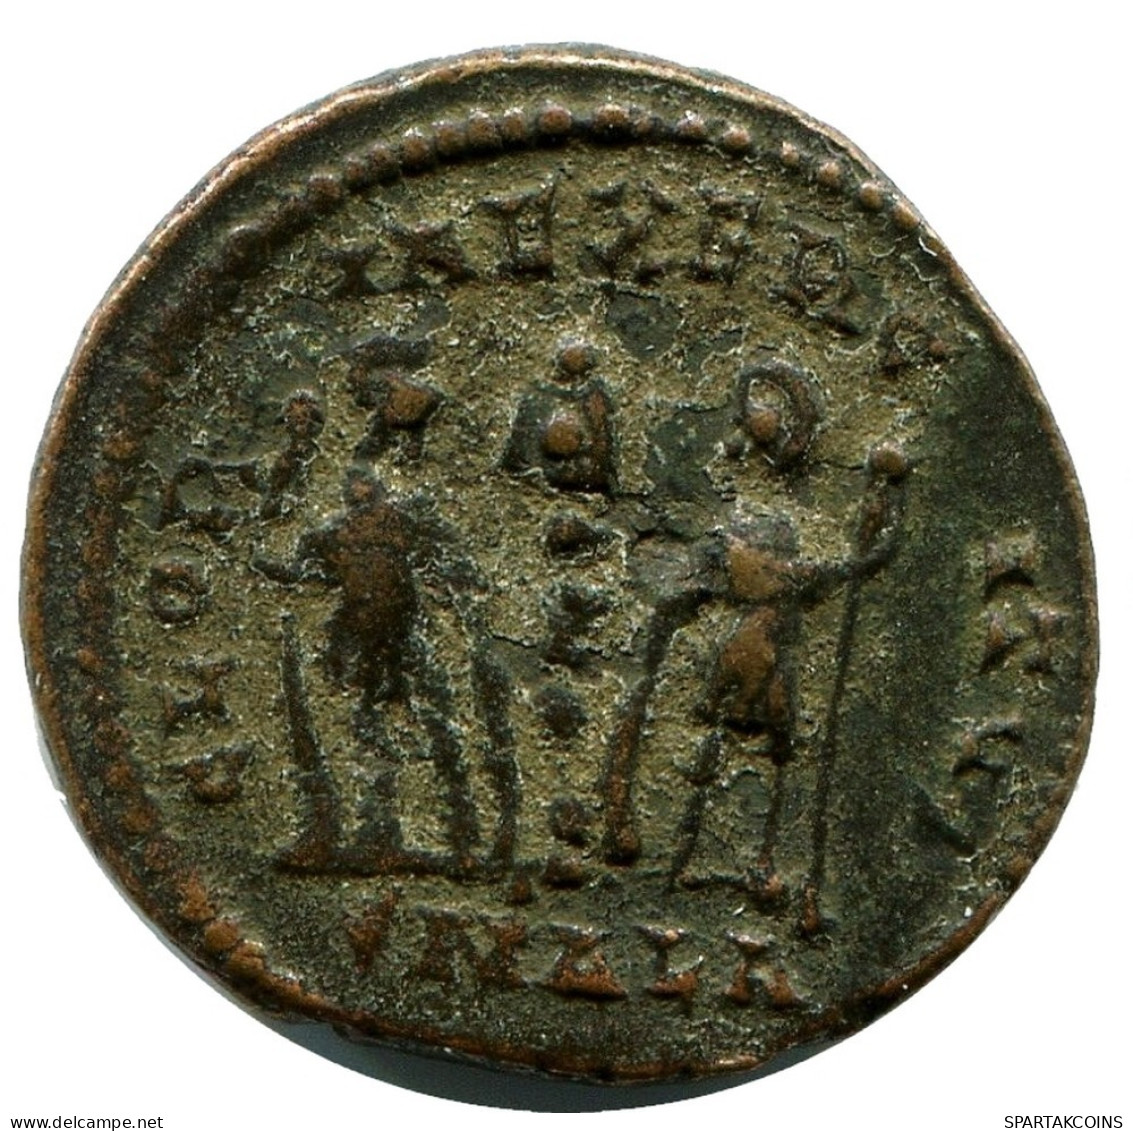 CONSTANS MINTED IN ALEKSANDRIA FOUND IN IHNASYAH HOARD EGYPT #ANC11353.14.F.A - The Christian Empire (307 AD Tot 363 AD)